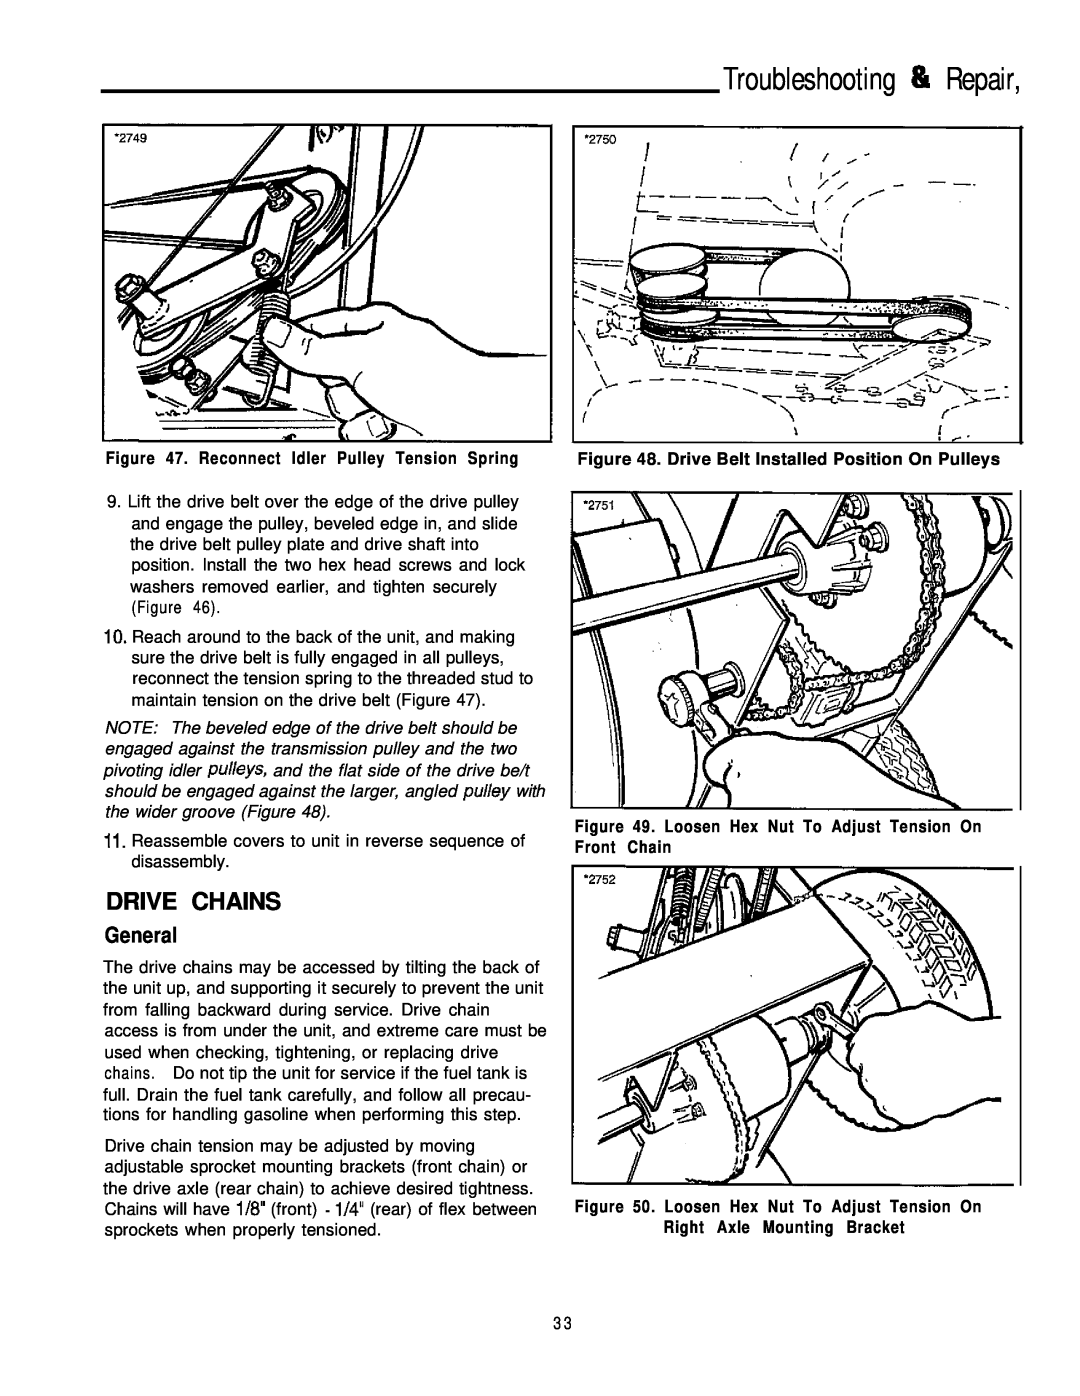 Simplicity 6/25, 8/25 manual Drive Chains, Troubleshooting & Repair, General, Reconnect Idler Pulley Tension Spring 